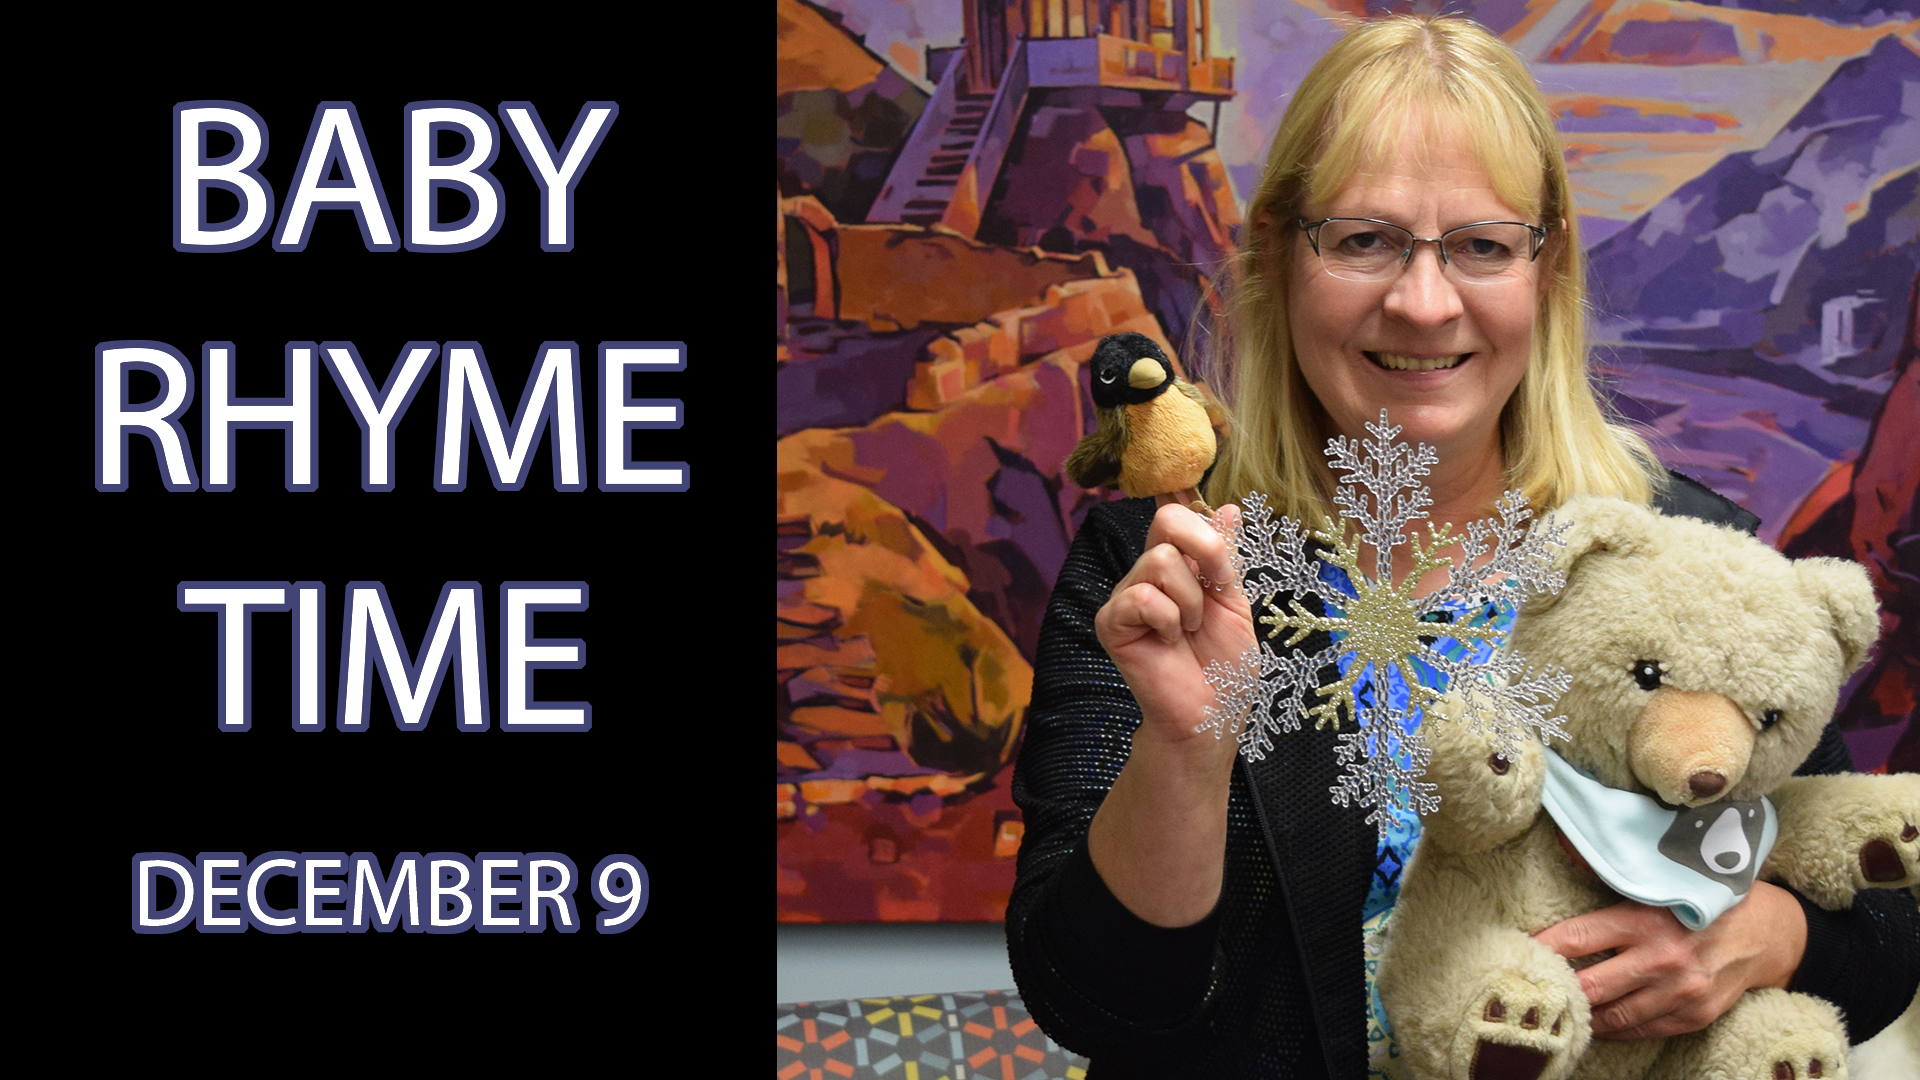 A woman holding various stuffed animals next to the text "Baby Rhyme Time December 9"